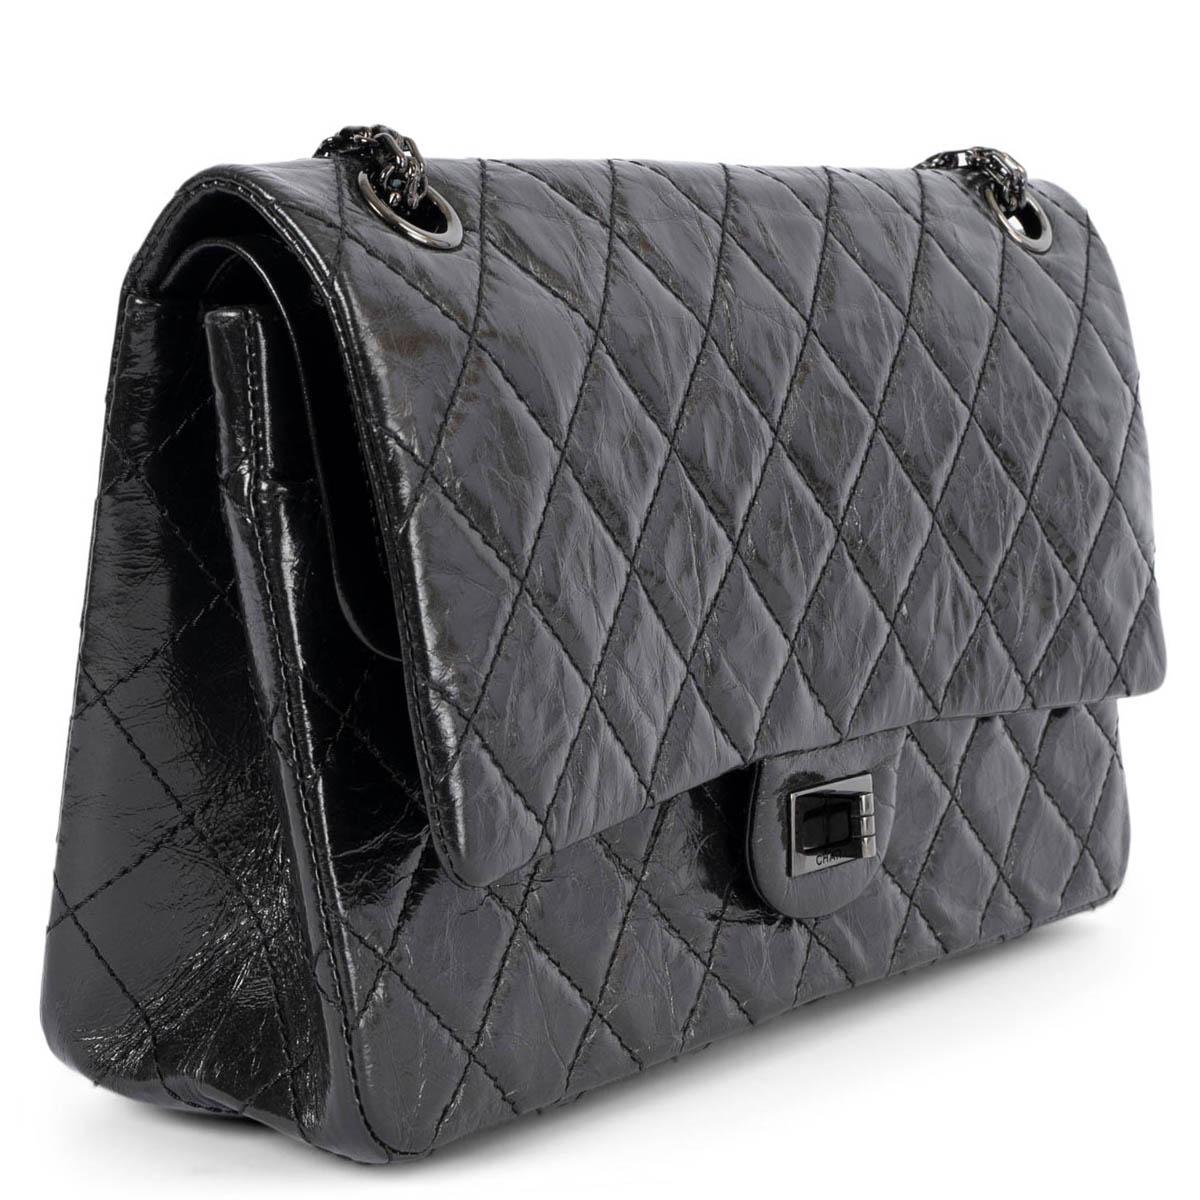 100% authentic Chanel 2.55 Reissue 226 double flap bag in black aged calfskin featuring classic diamond quilted stitchings. Opens with a black metal turn-lock to a black smooth calfskin interior with two patch pockets and one lipstick pocket against